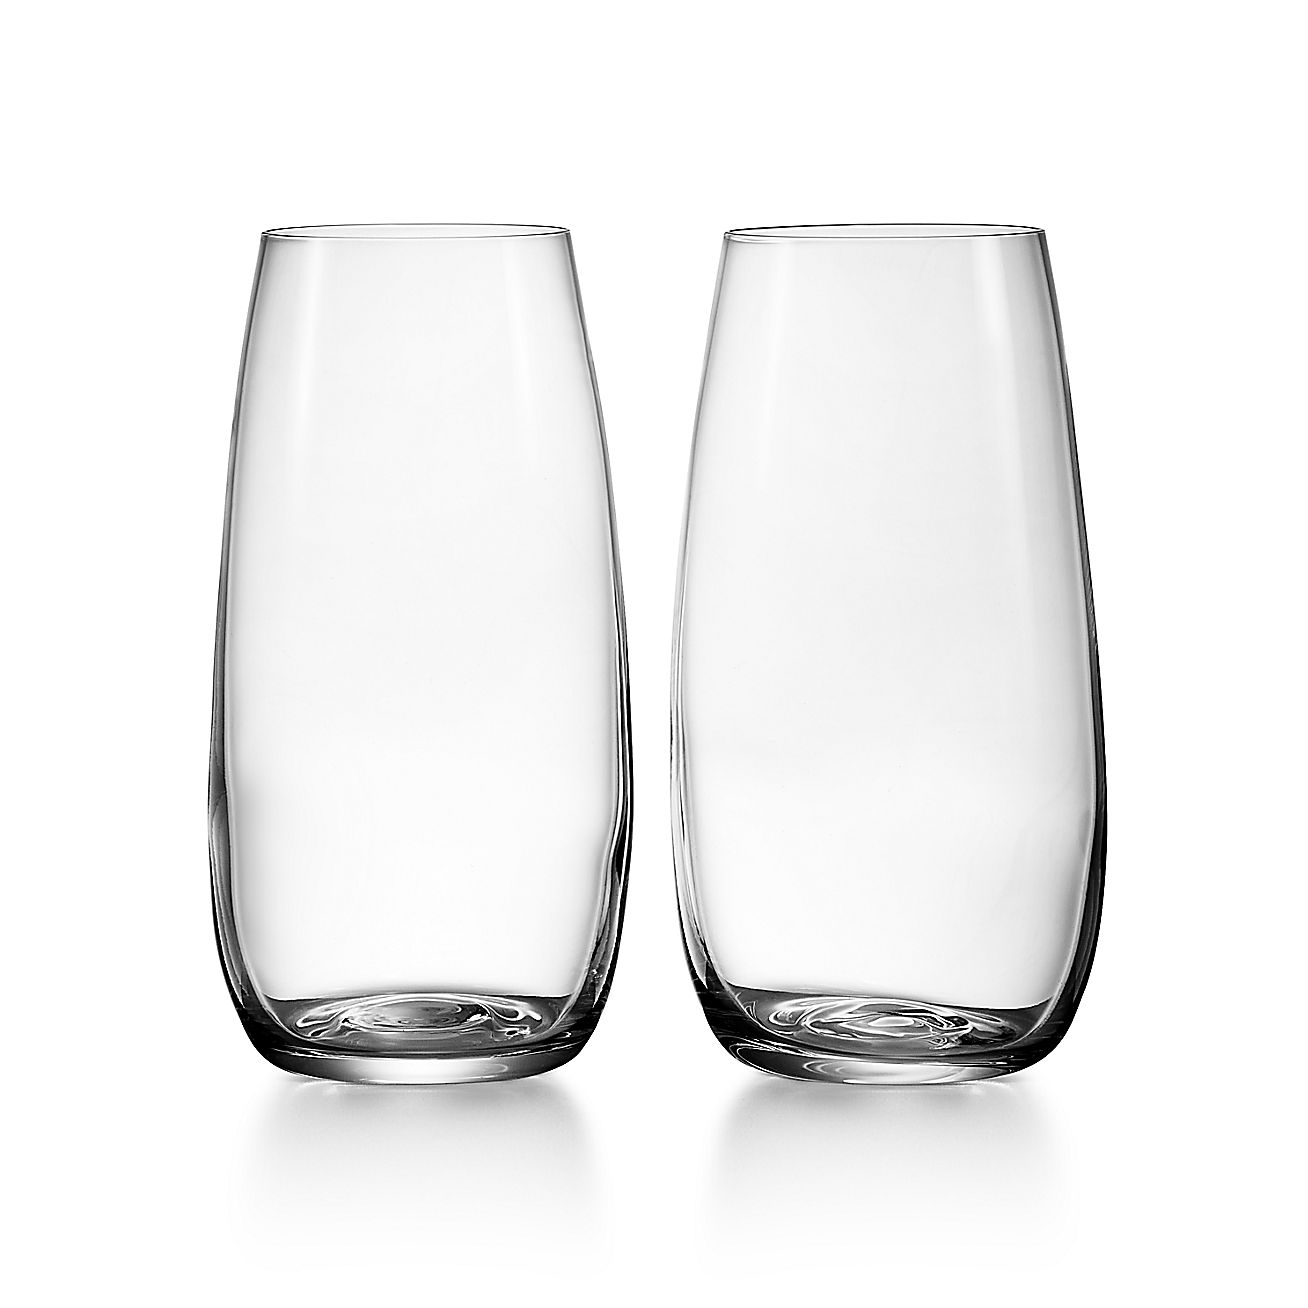 Tiffany Home Essentials Champagne Flutes in Crystal Glass, Set of Two